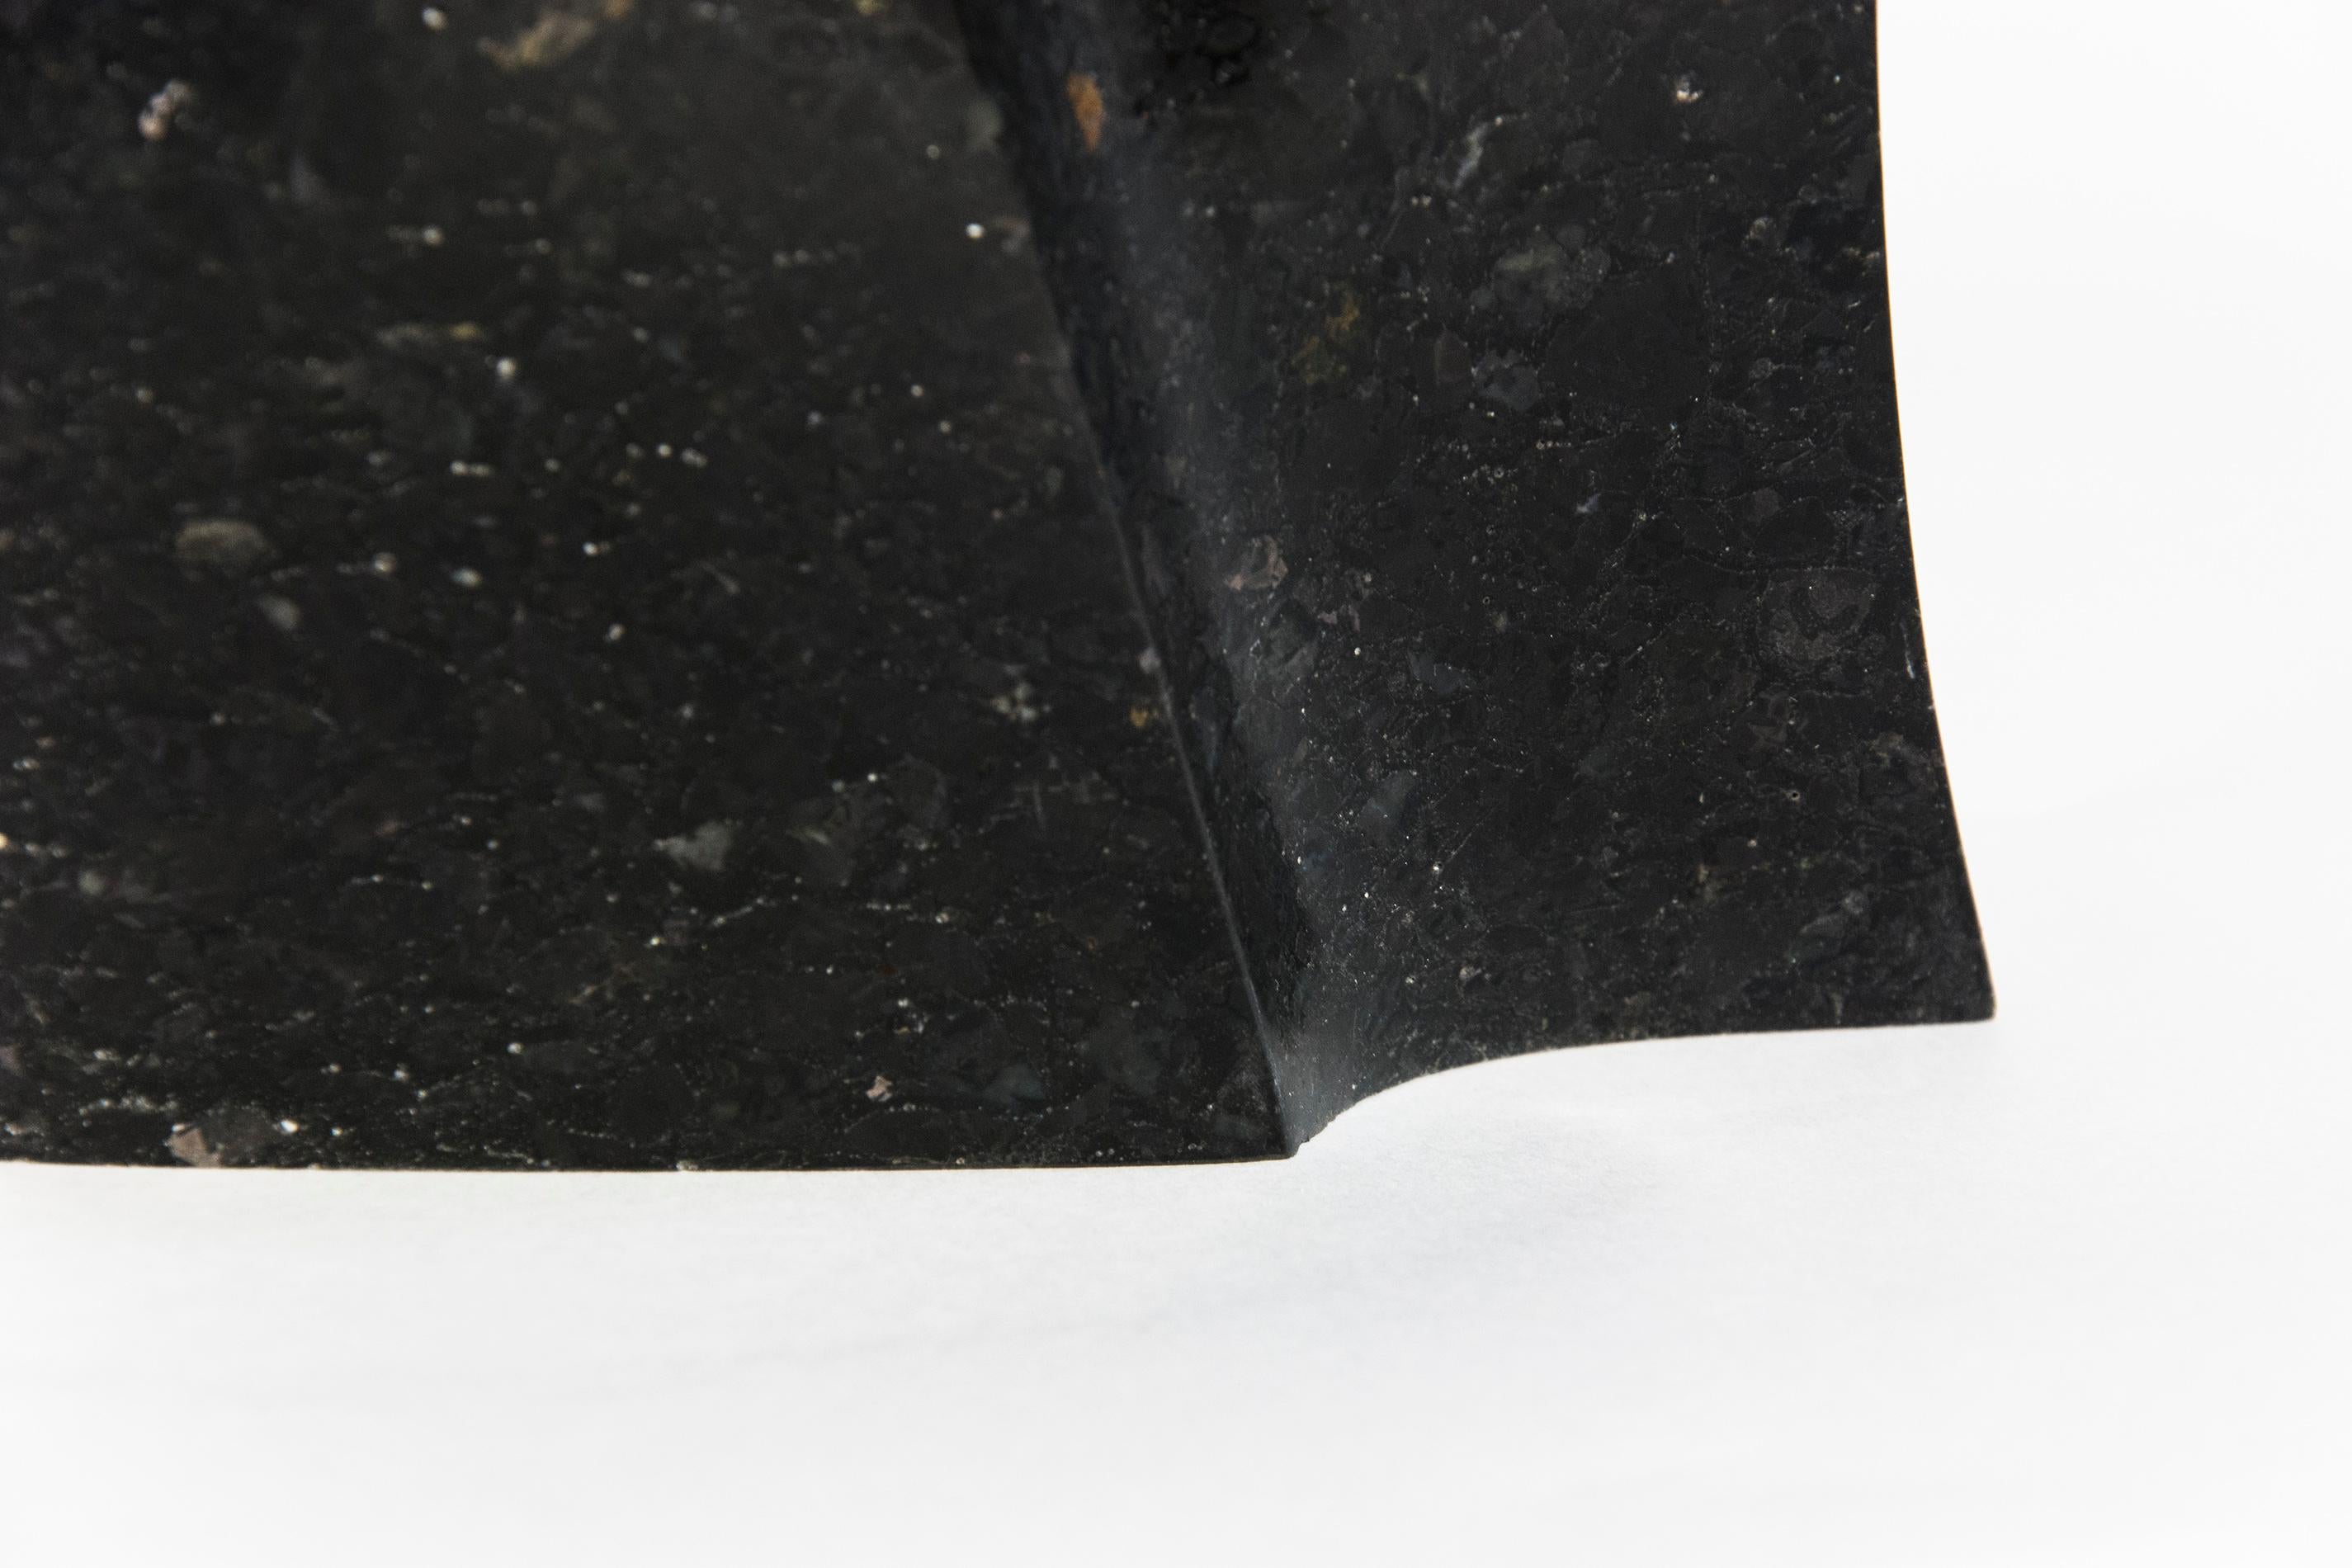 Embrace 2/50 - dark, smooth, polished, abstract, black granite sculpture - Contemporary Sculpture by Jeremy Guy